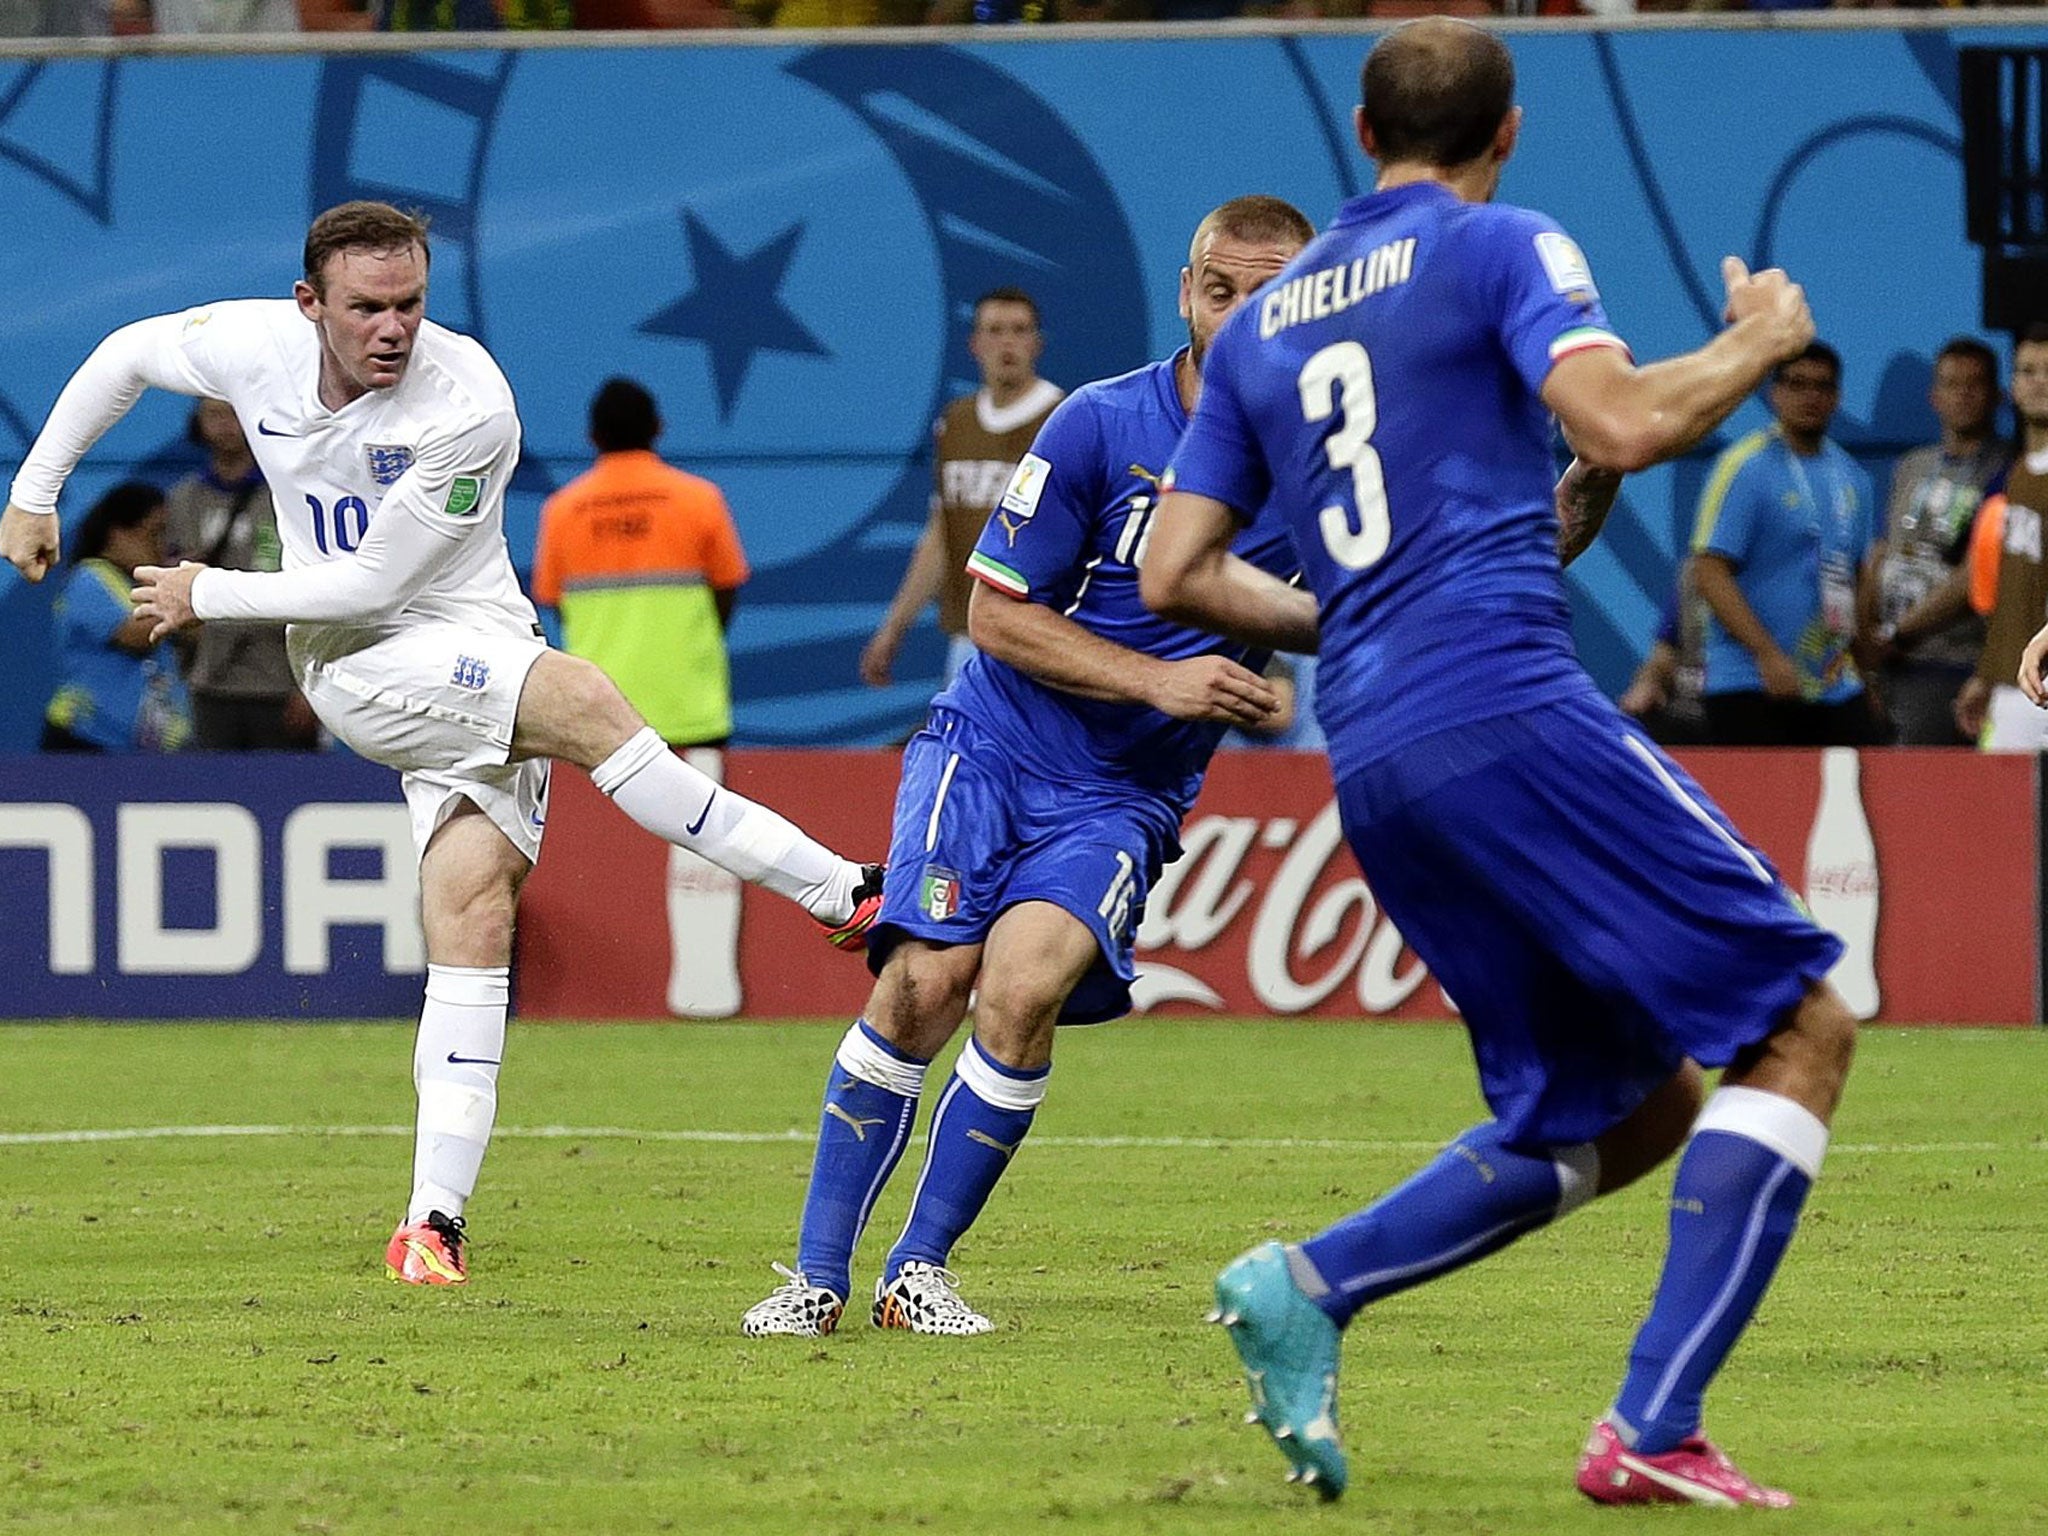 Wayne Rooney will need to be back to his best against Uruguay